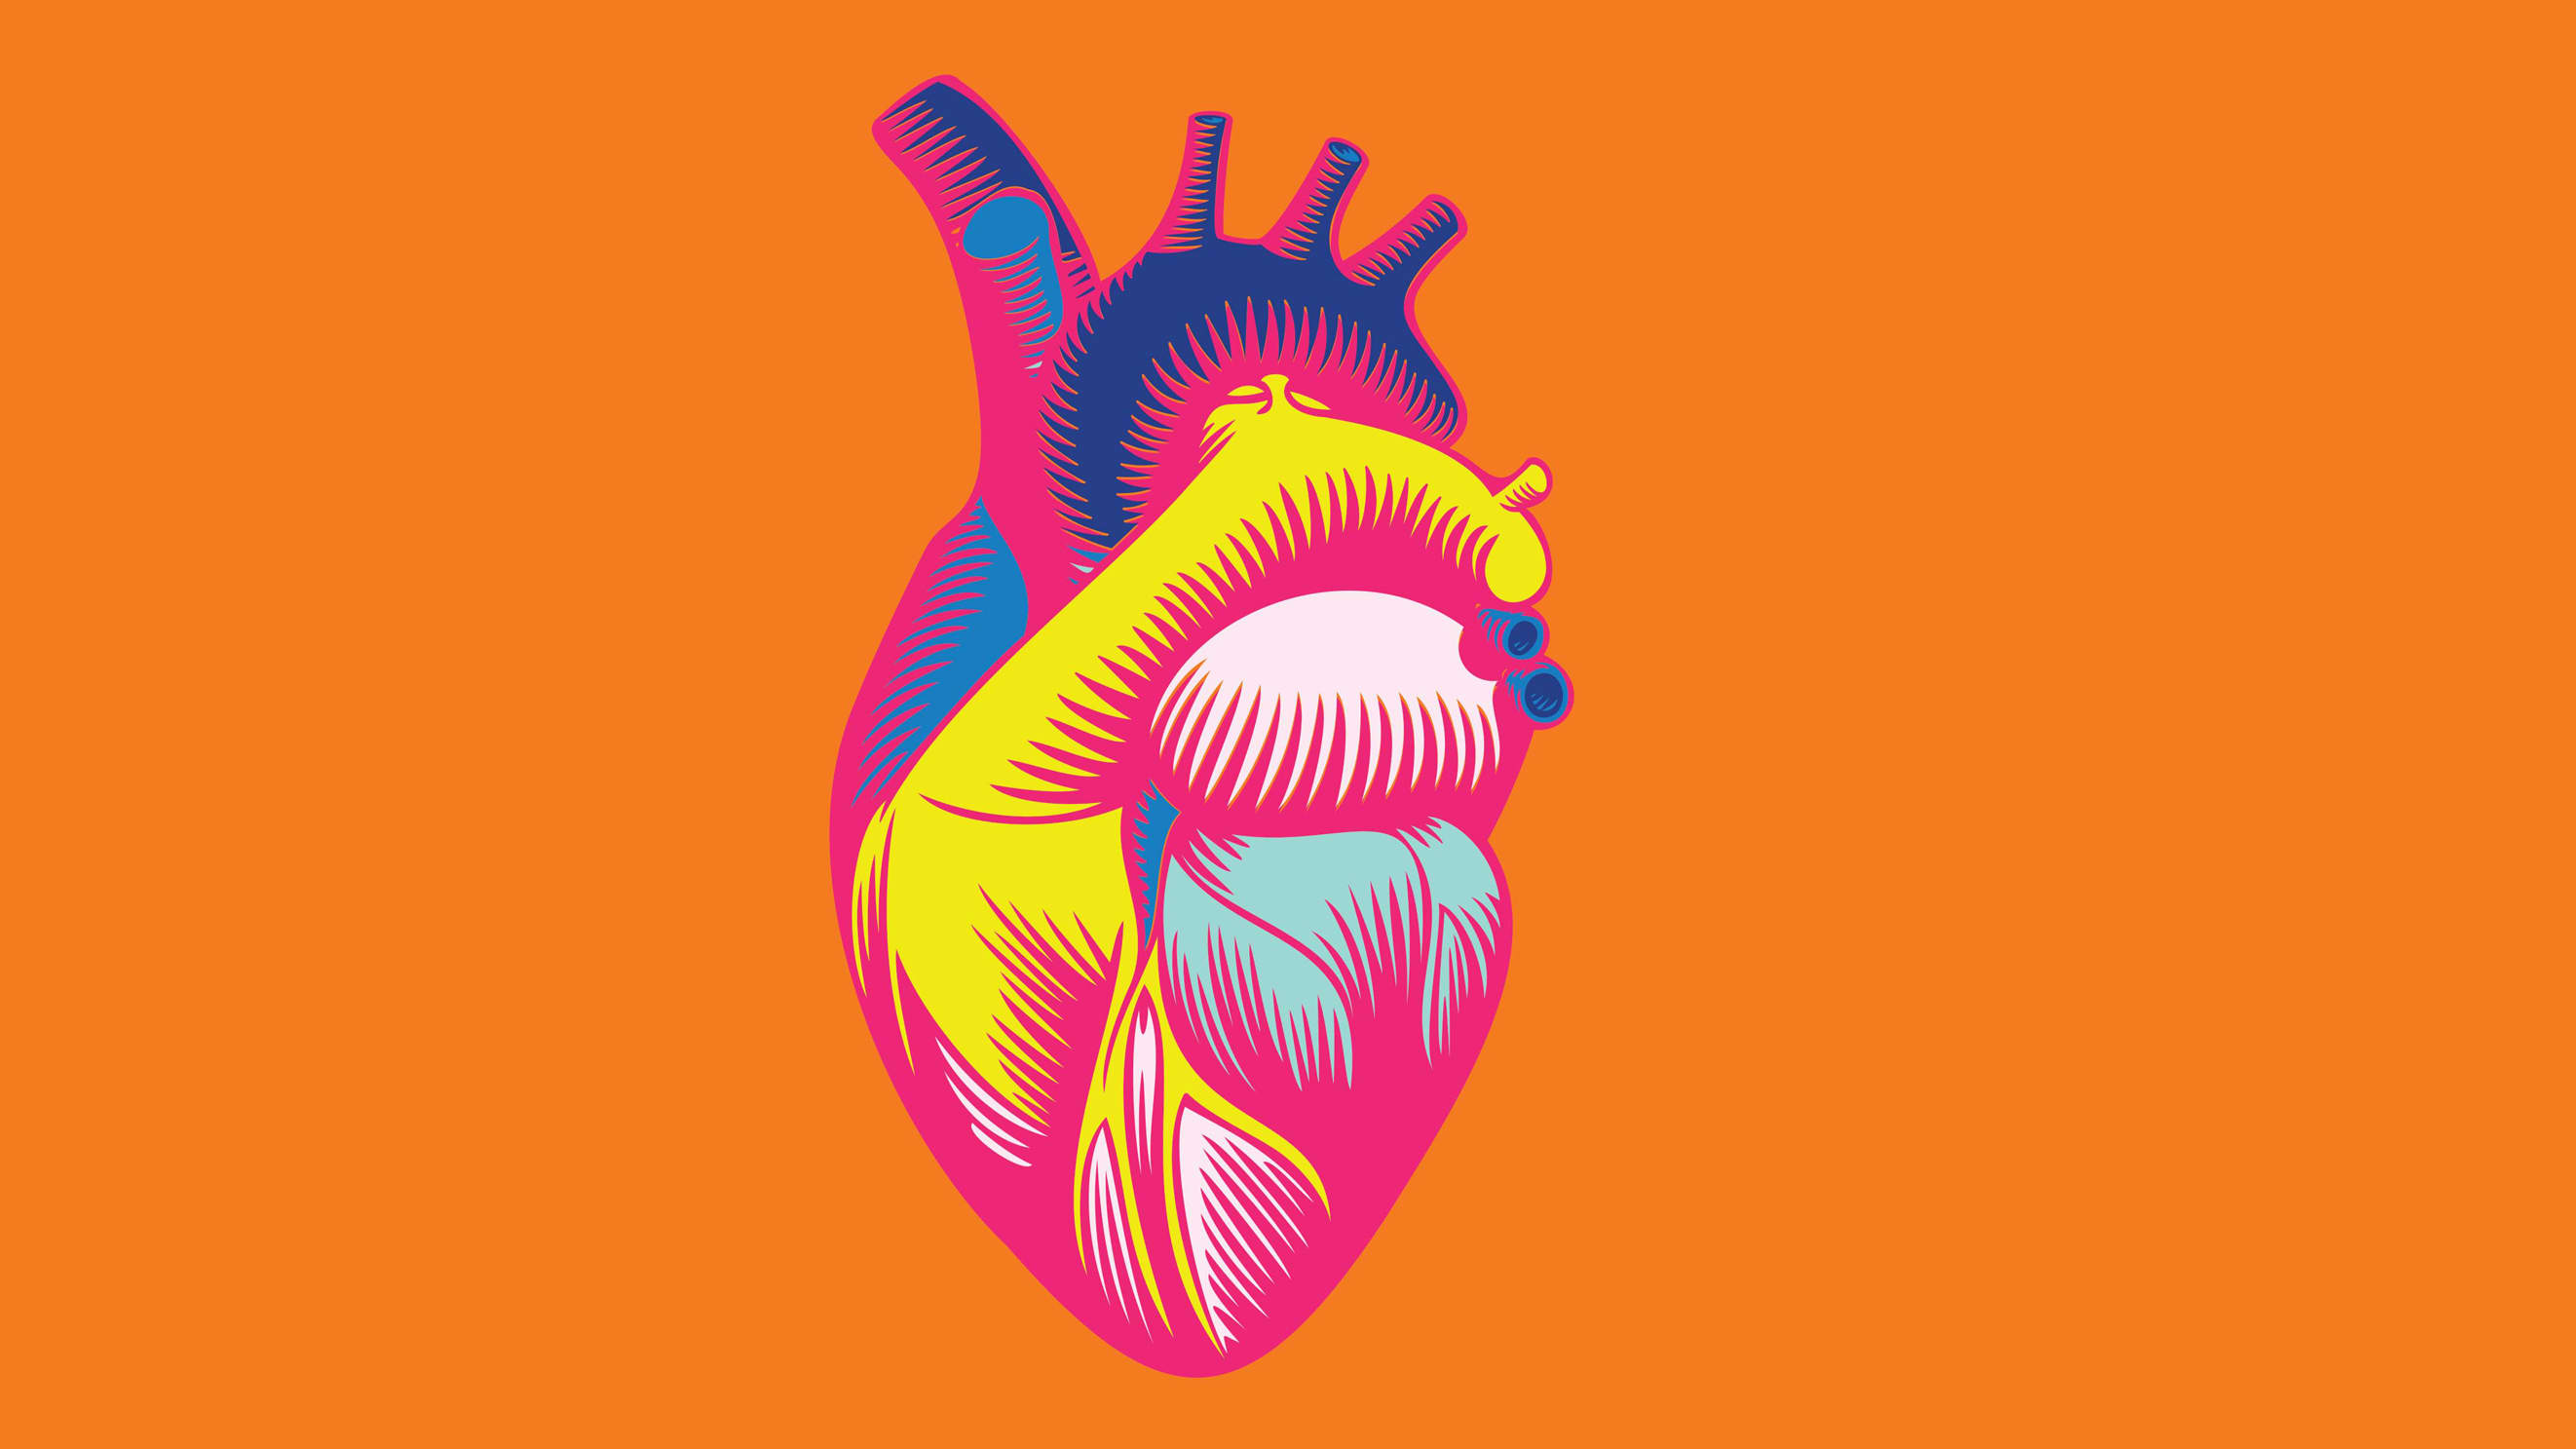 Anatomical illustration of a pink and yellow heart on an orange background.